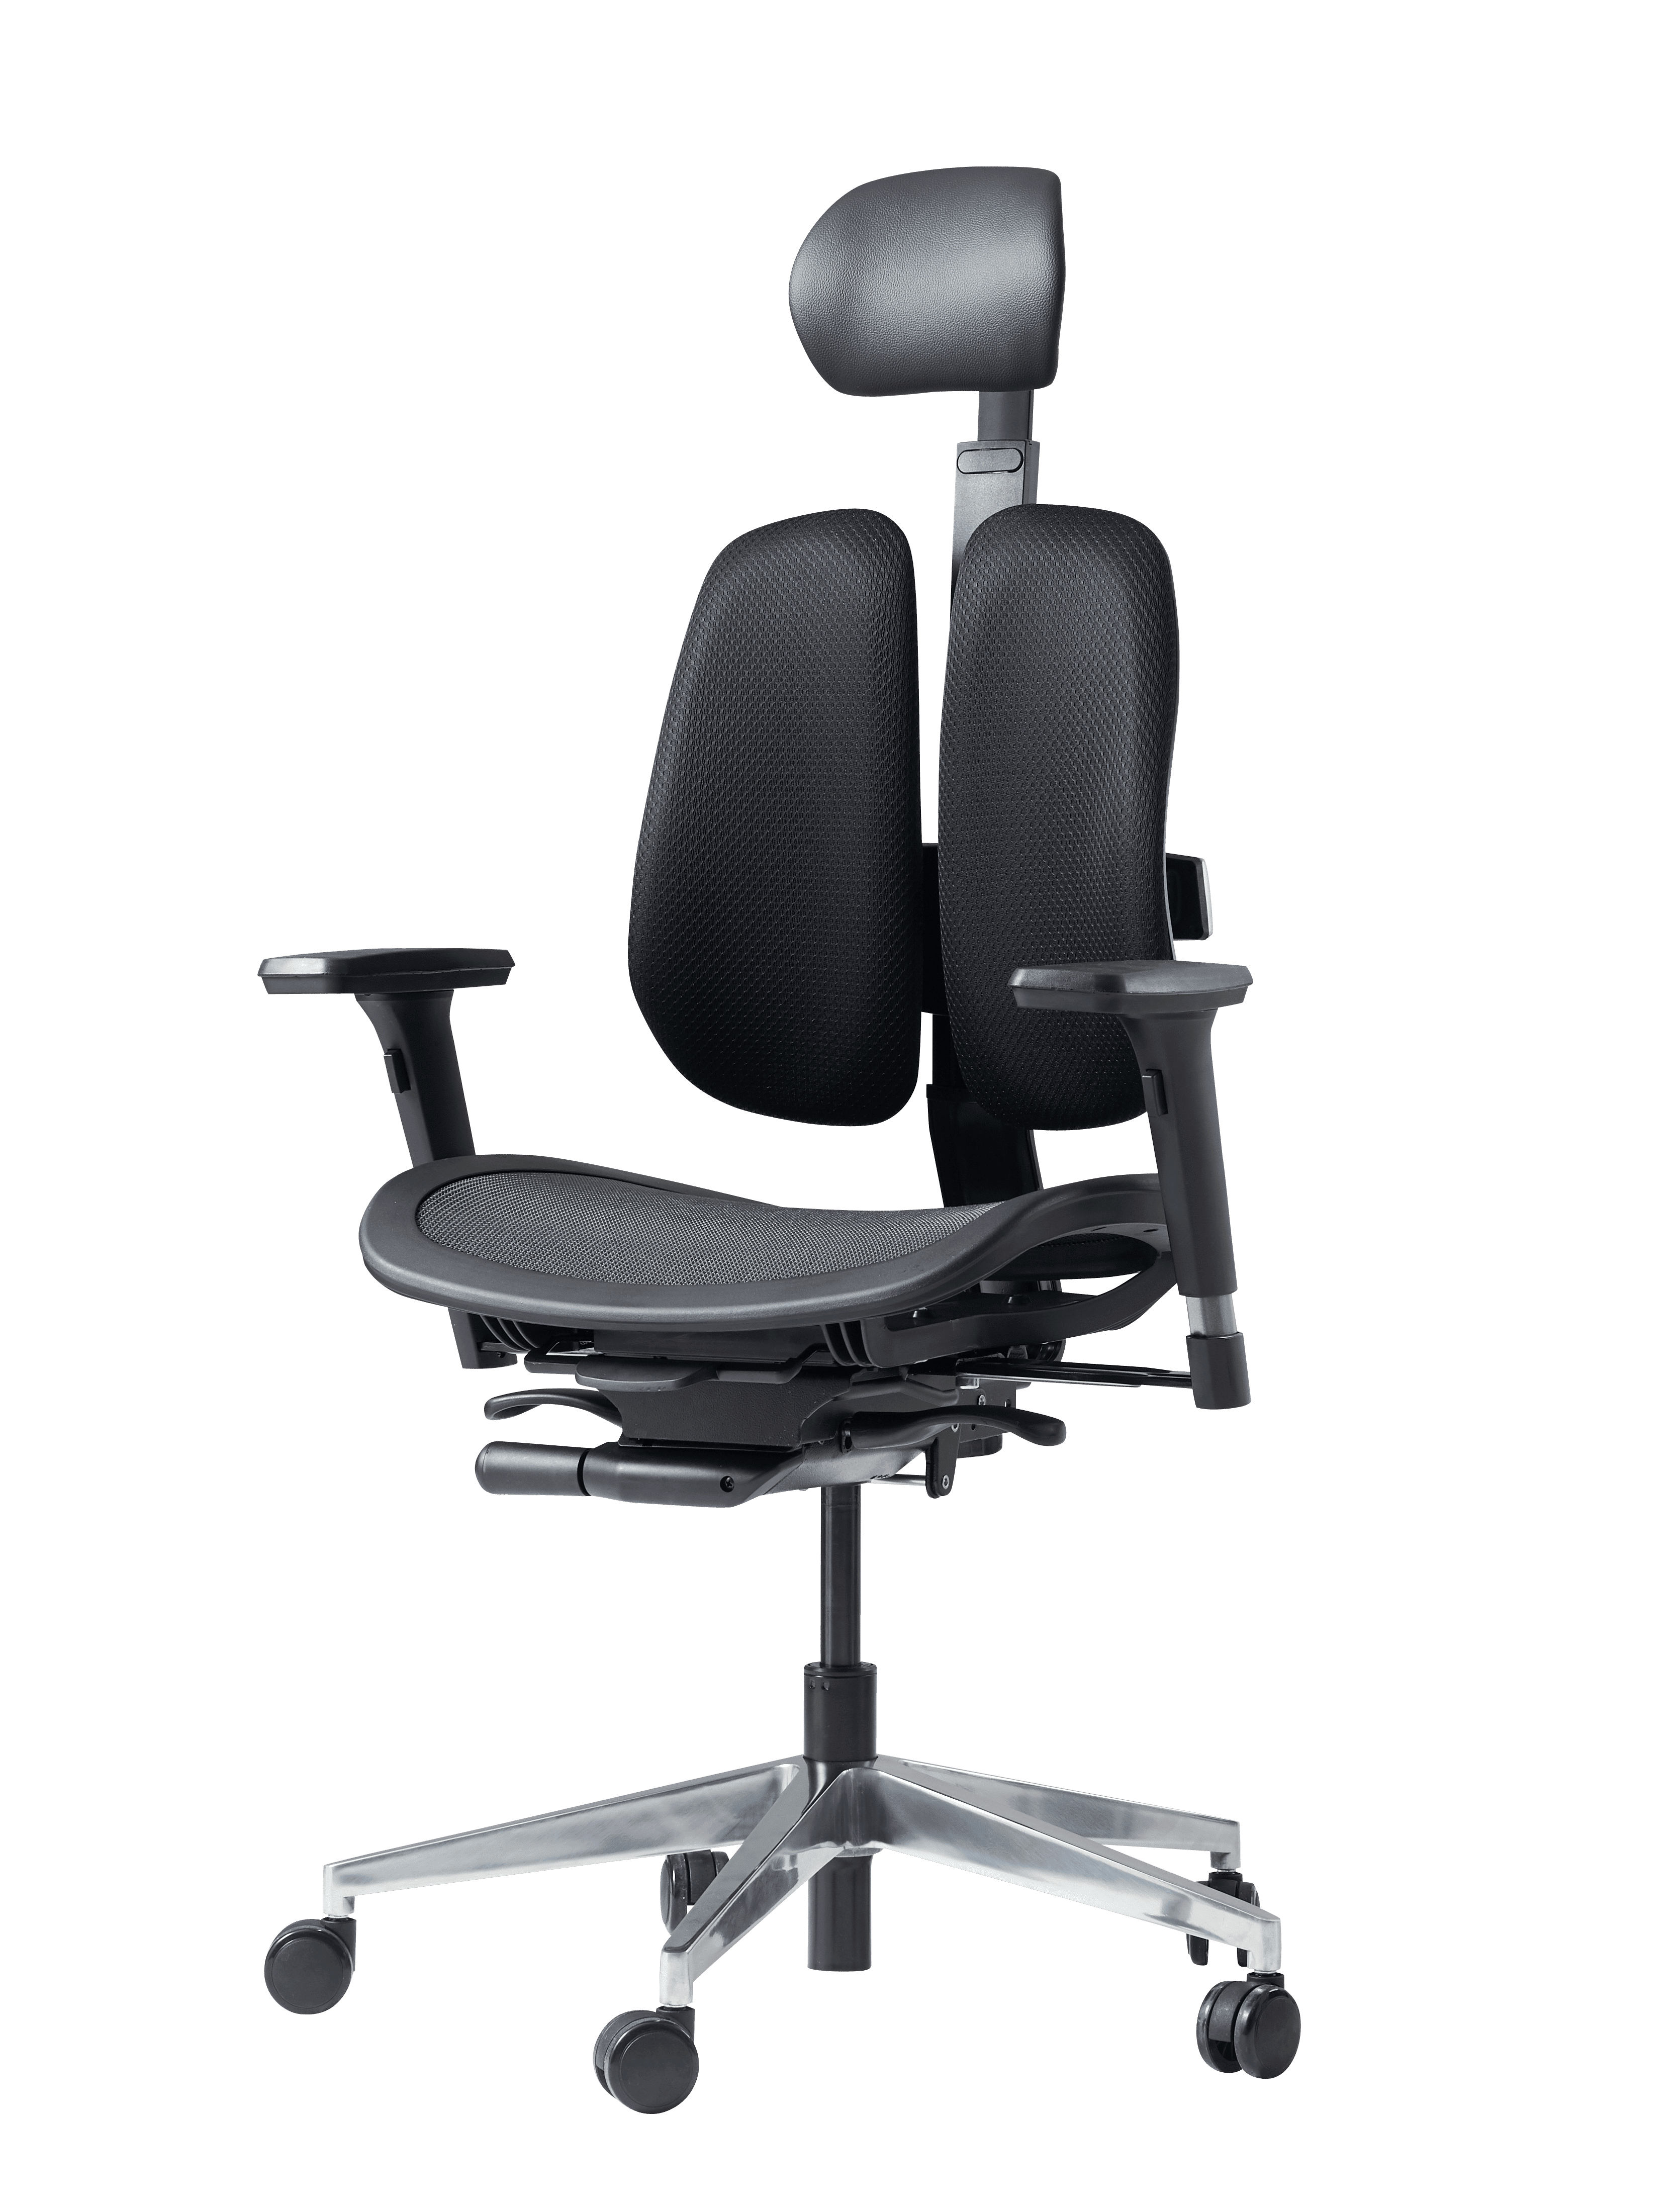 Back Support Chairs for Back Pain